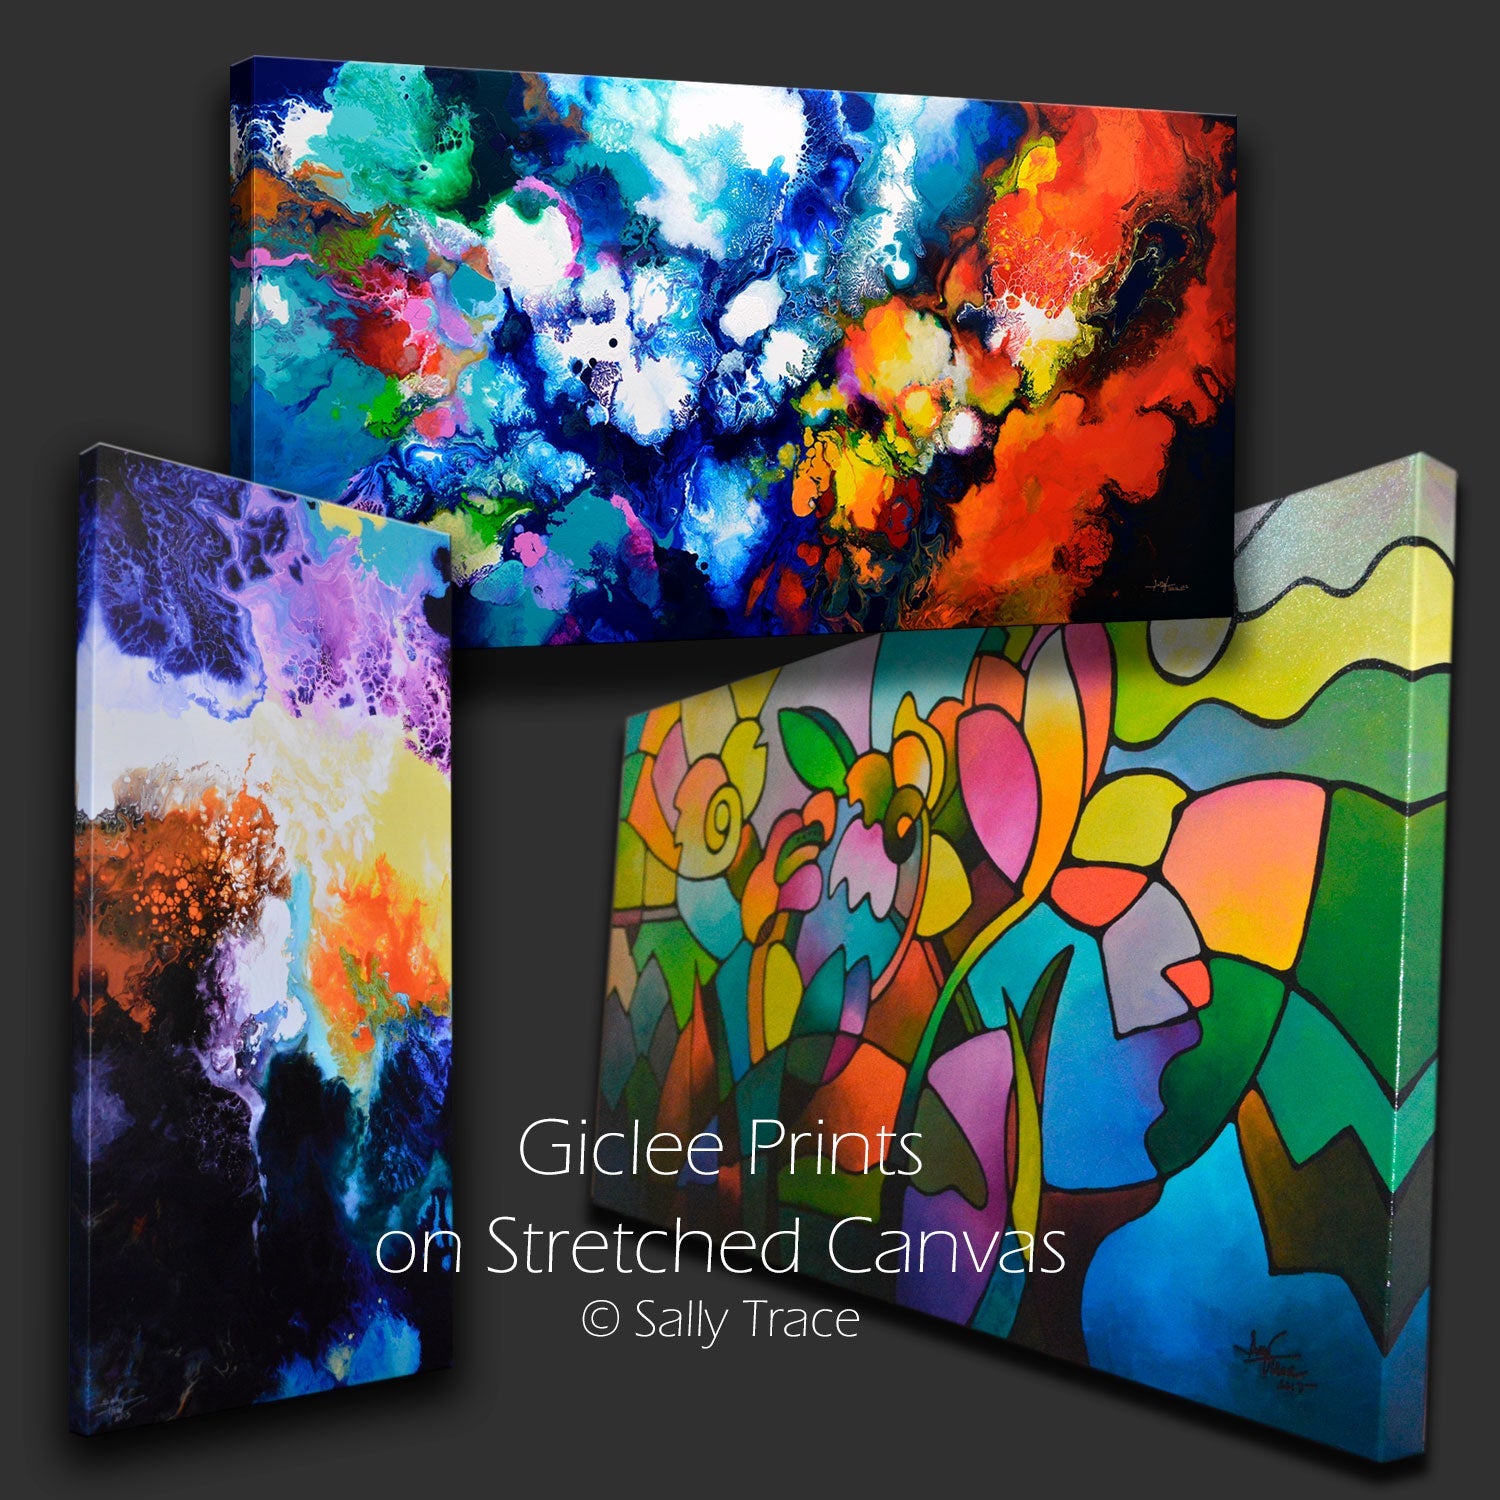 Giclee prints on stretched canvas by sally trace